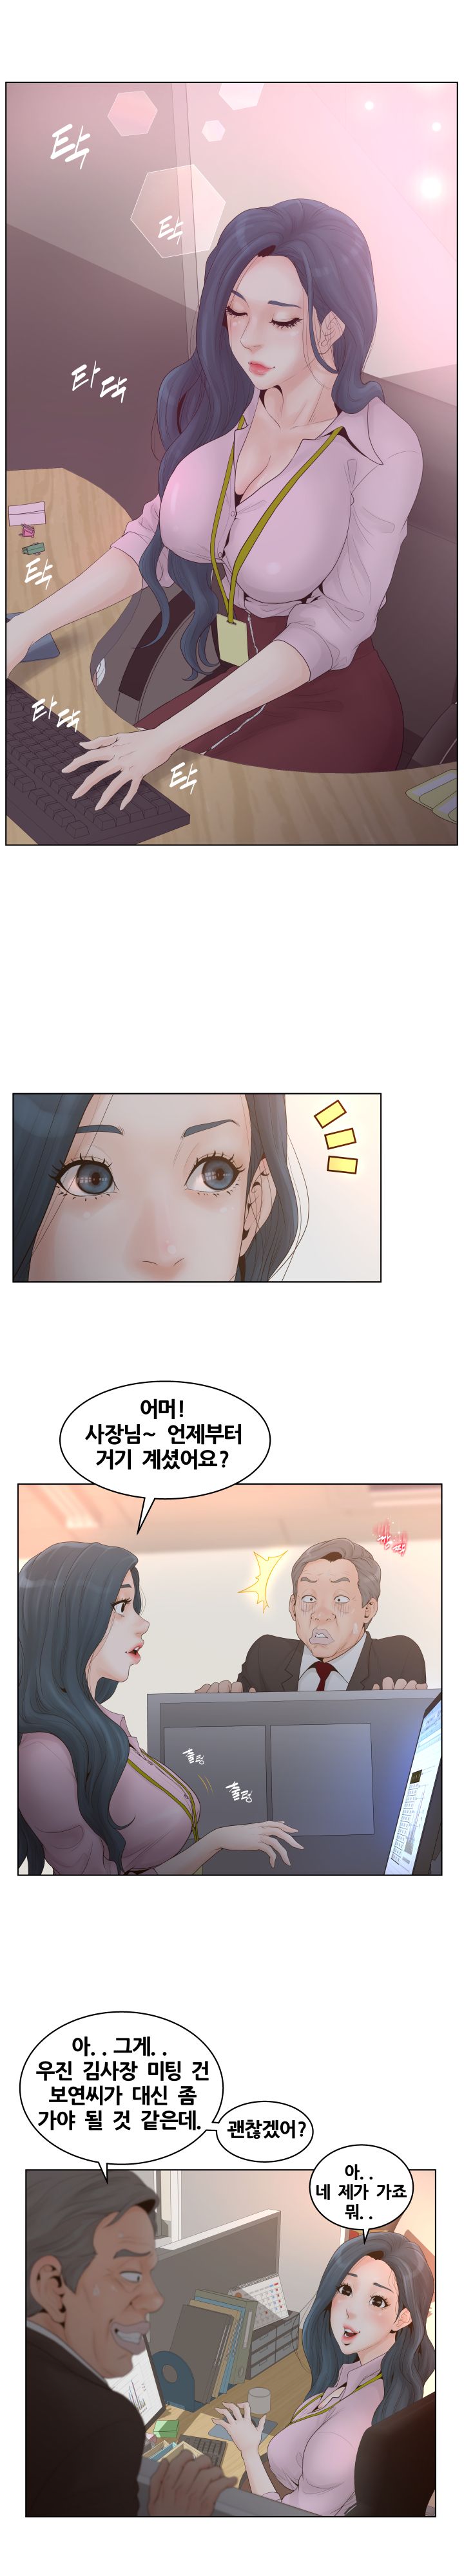 Share Girls Raw - Chapter 1 Page 2